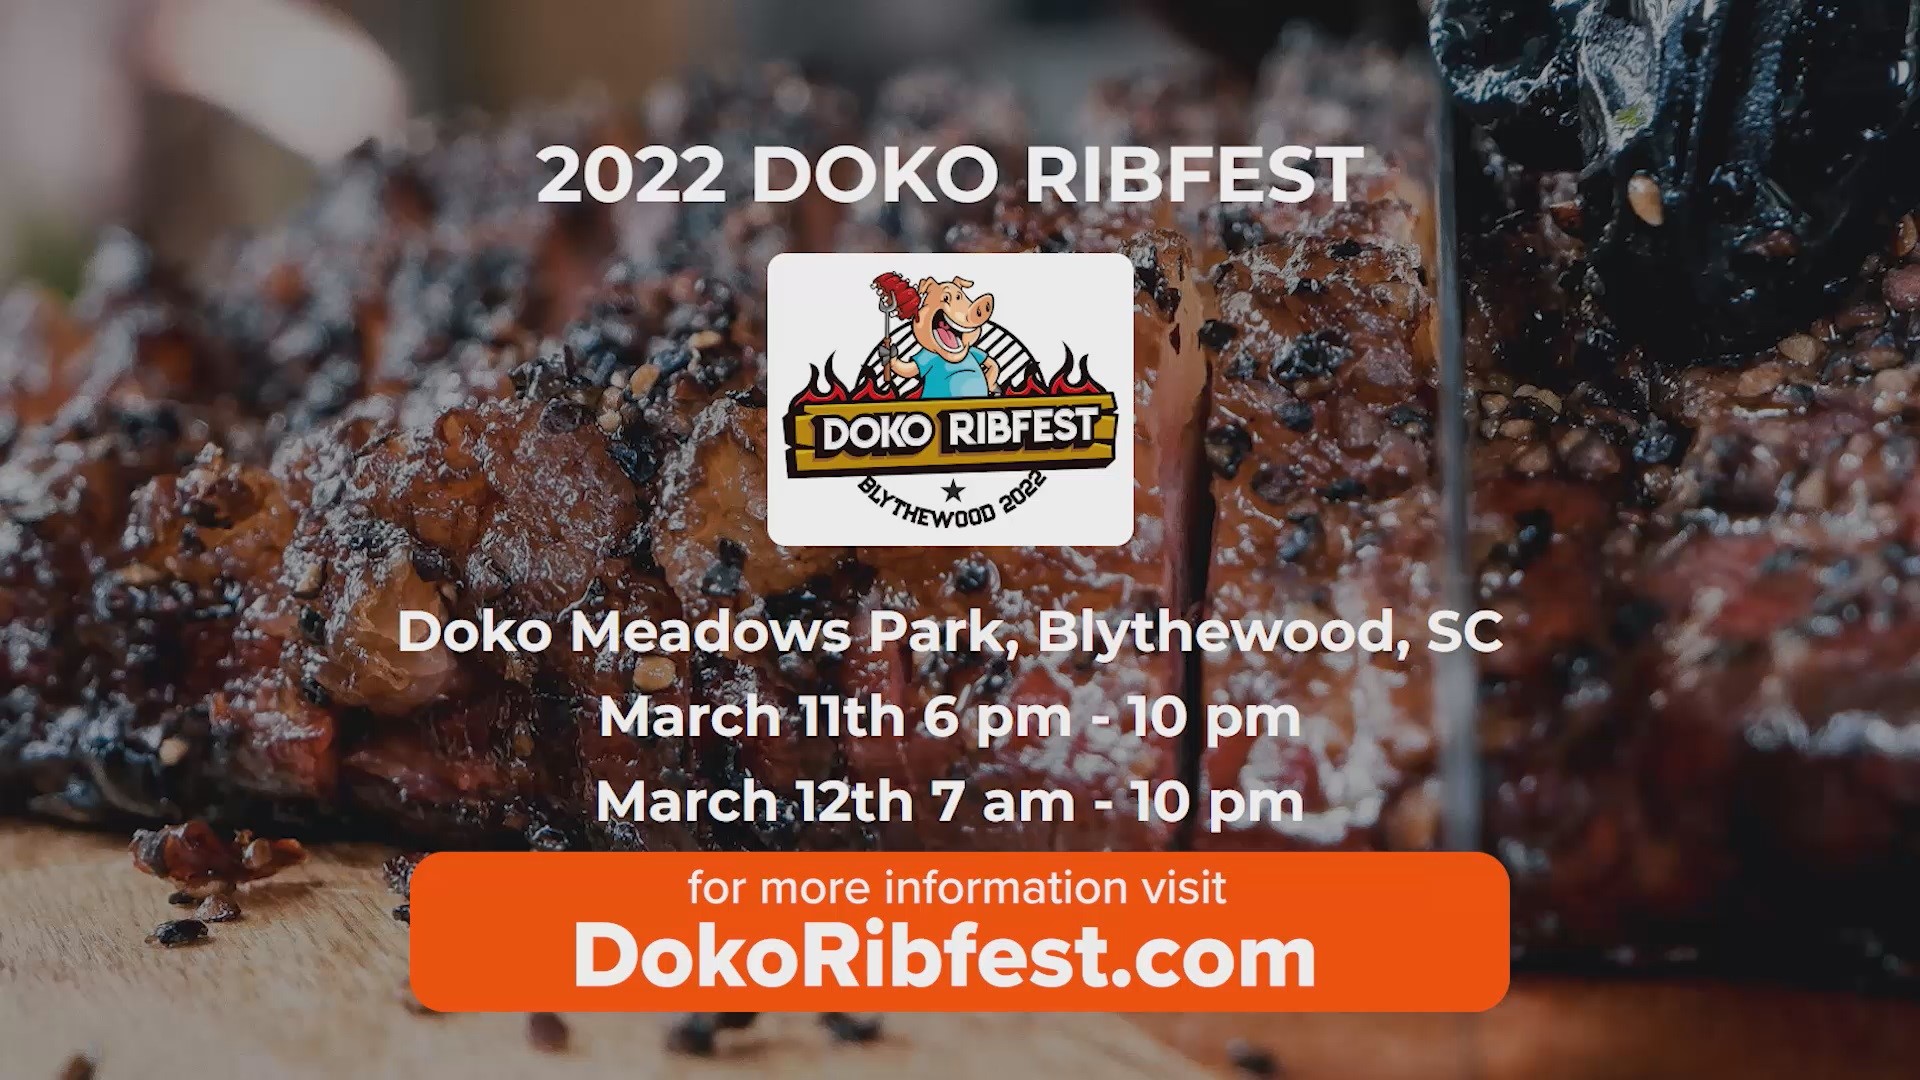 Join us for the 2022 Doko Ribfest Cook Off in the Park!